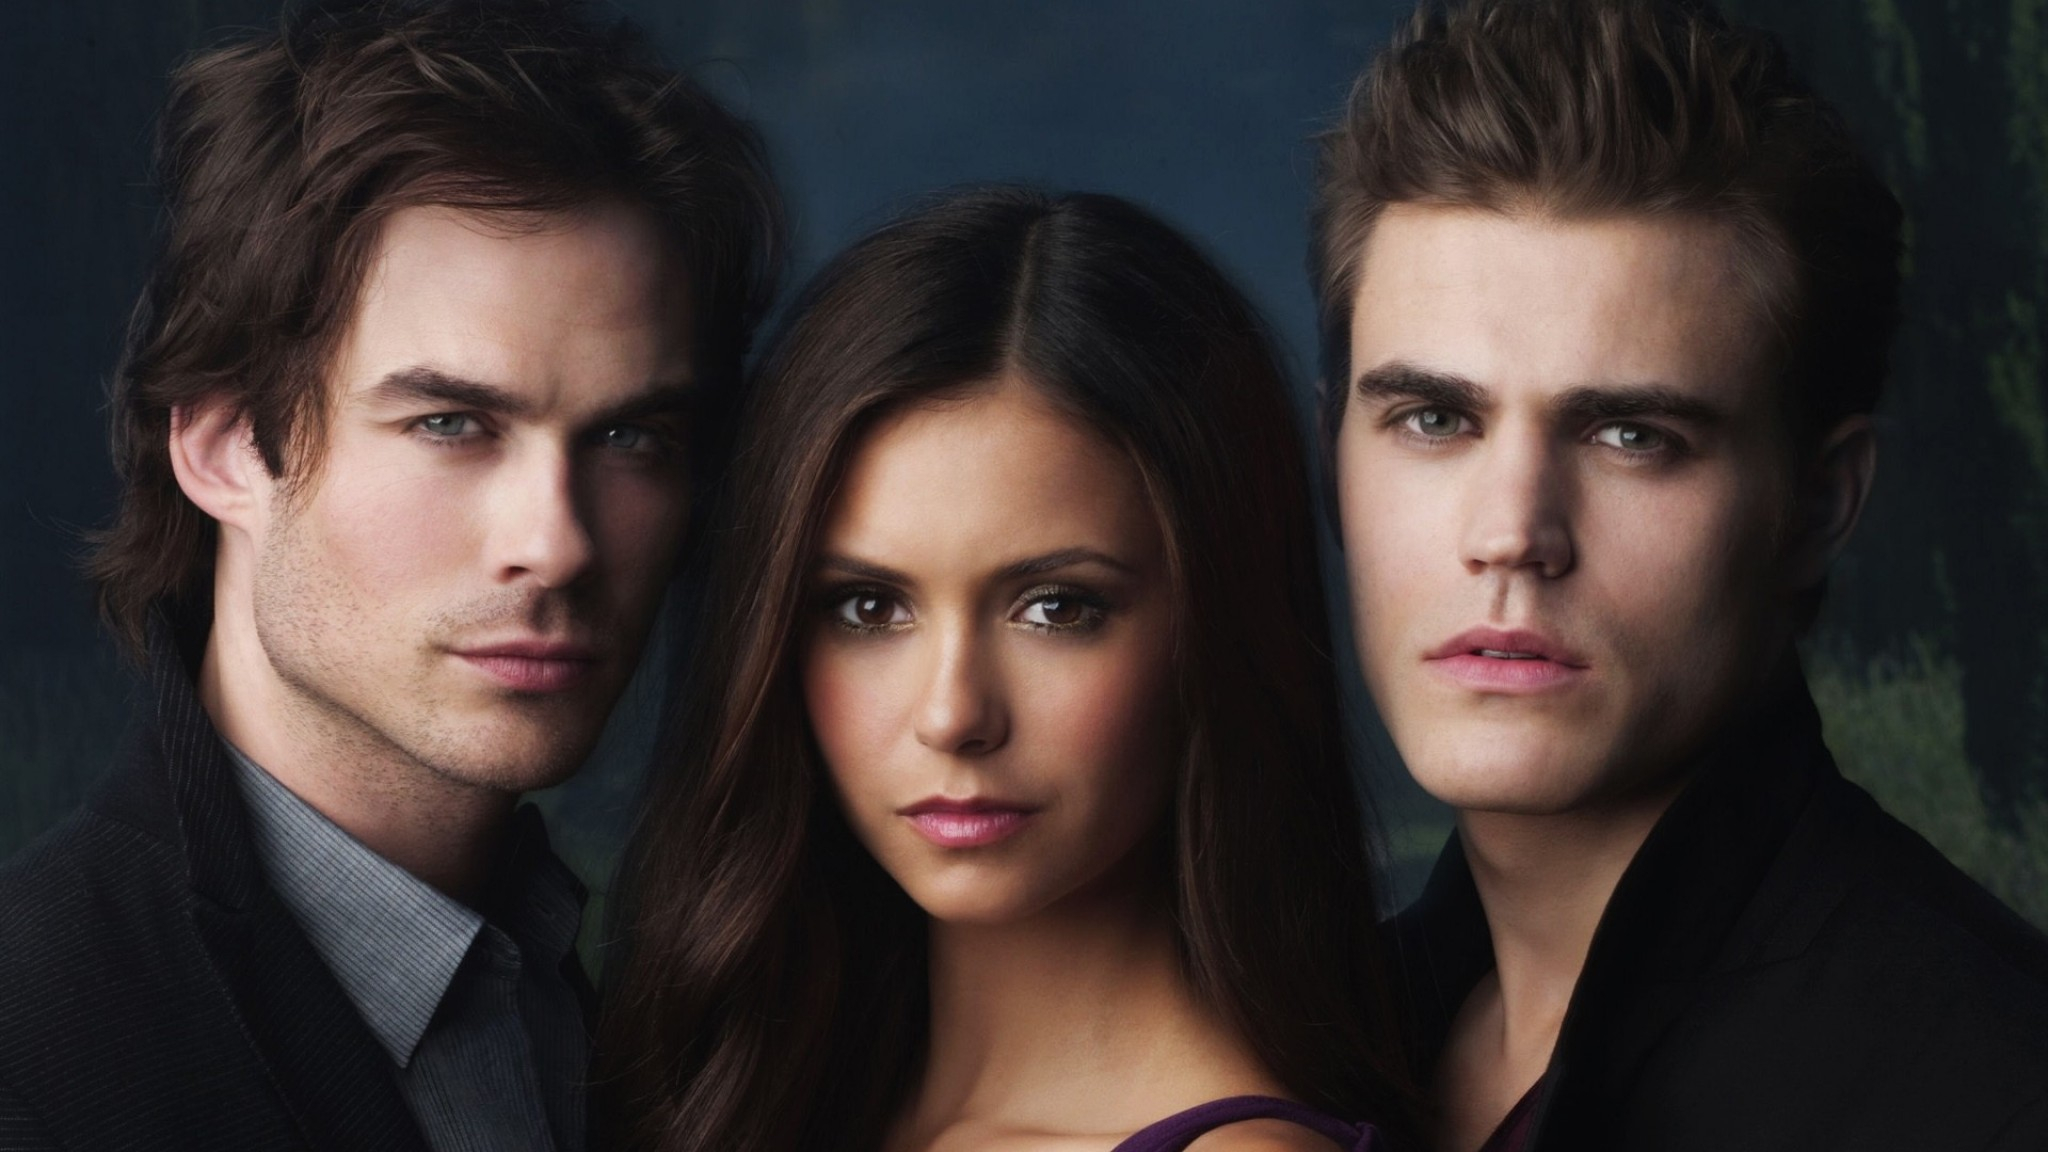 2048x1152 80+ The Vampire Diaries HD Wallpapers and Backgrounds